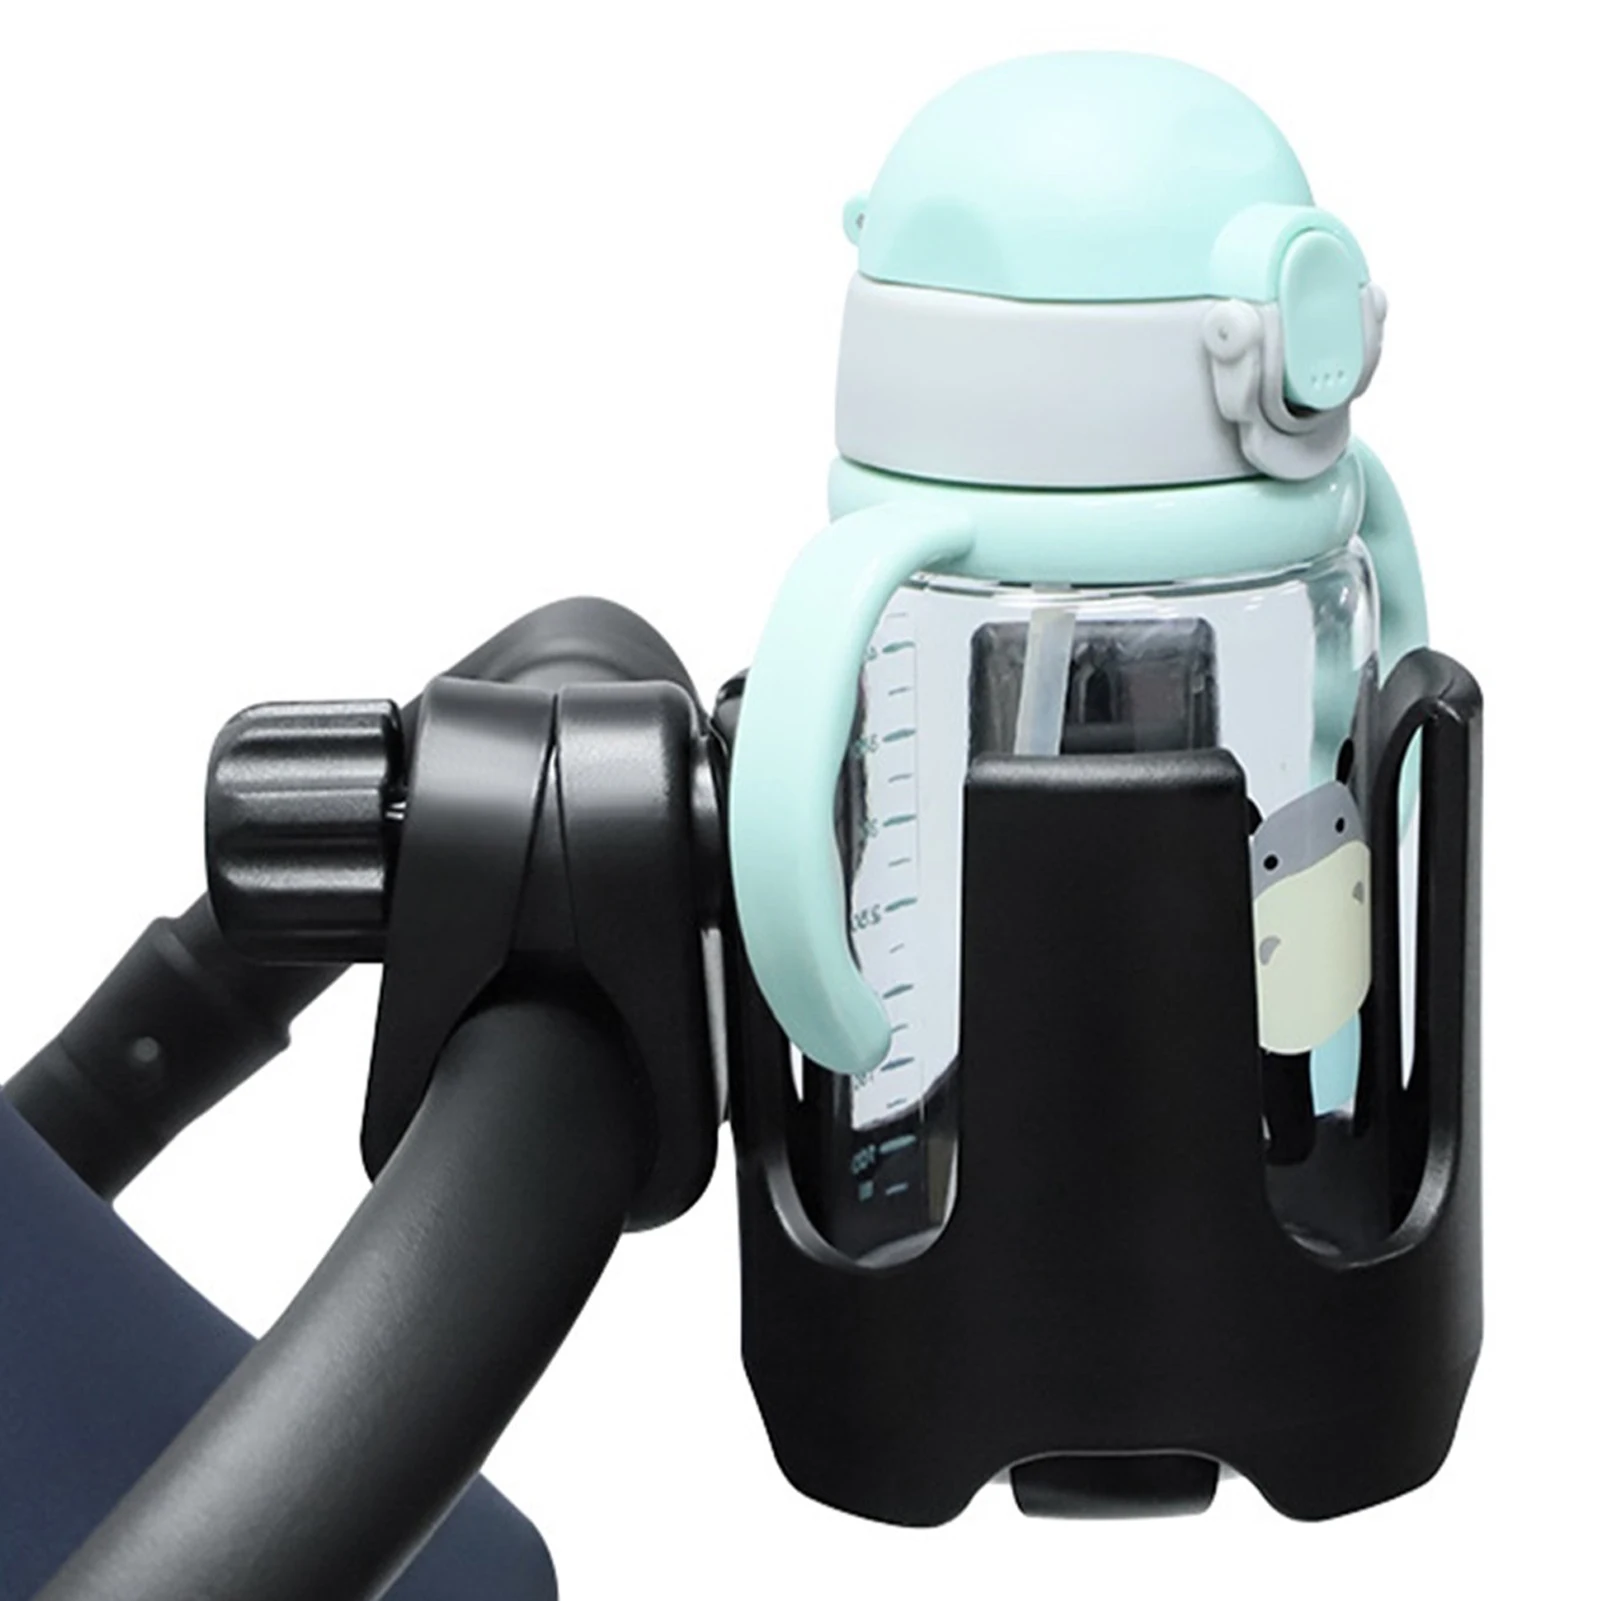 Universal Baby Stroller Cup Holder For Most Stroller Bike Walker Scooter Handlebar Holds Most Cups/Water Bottles Accessories